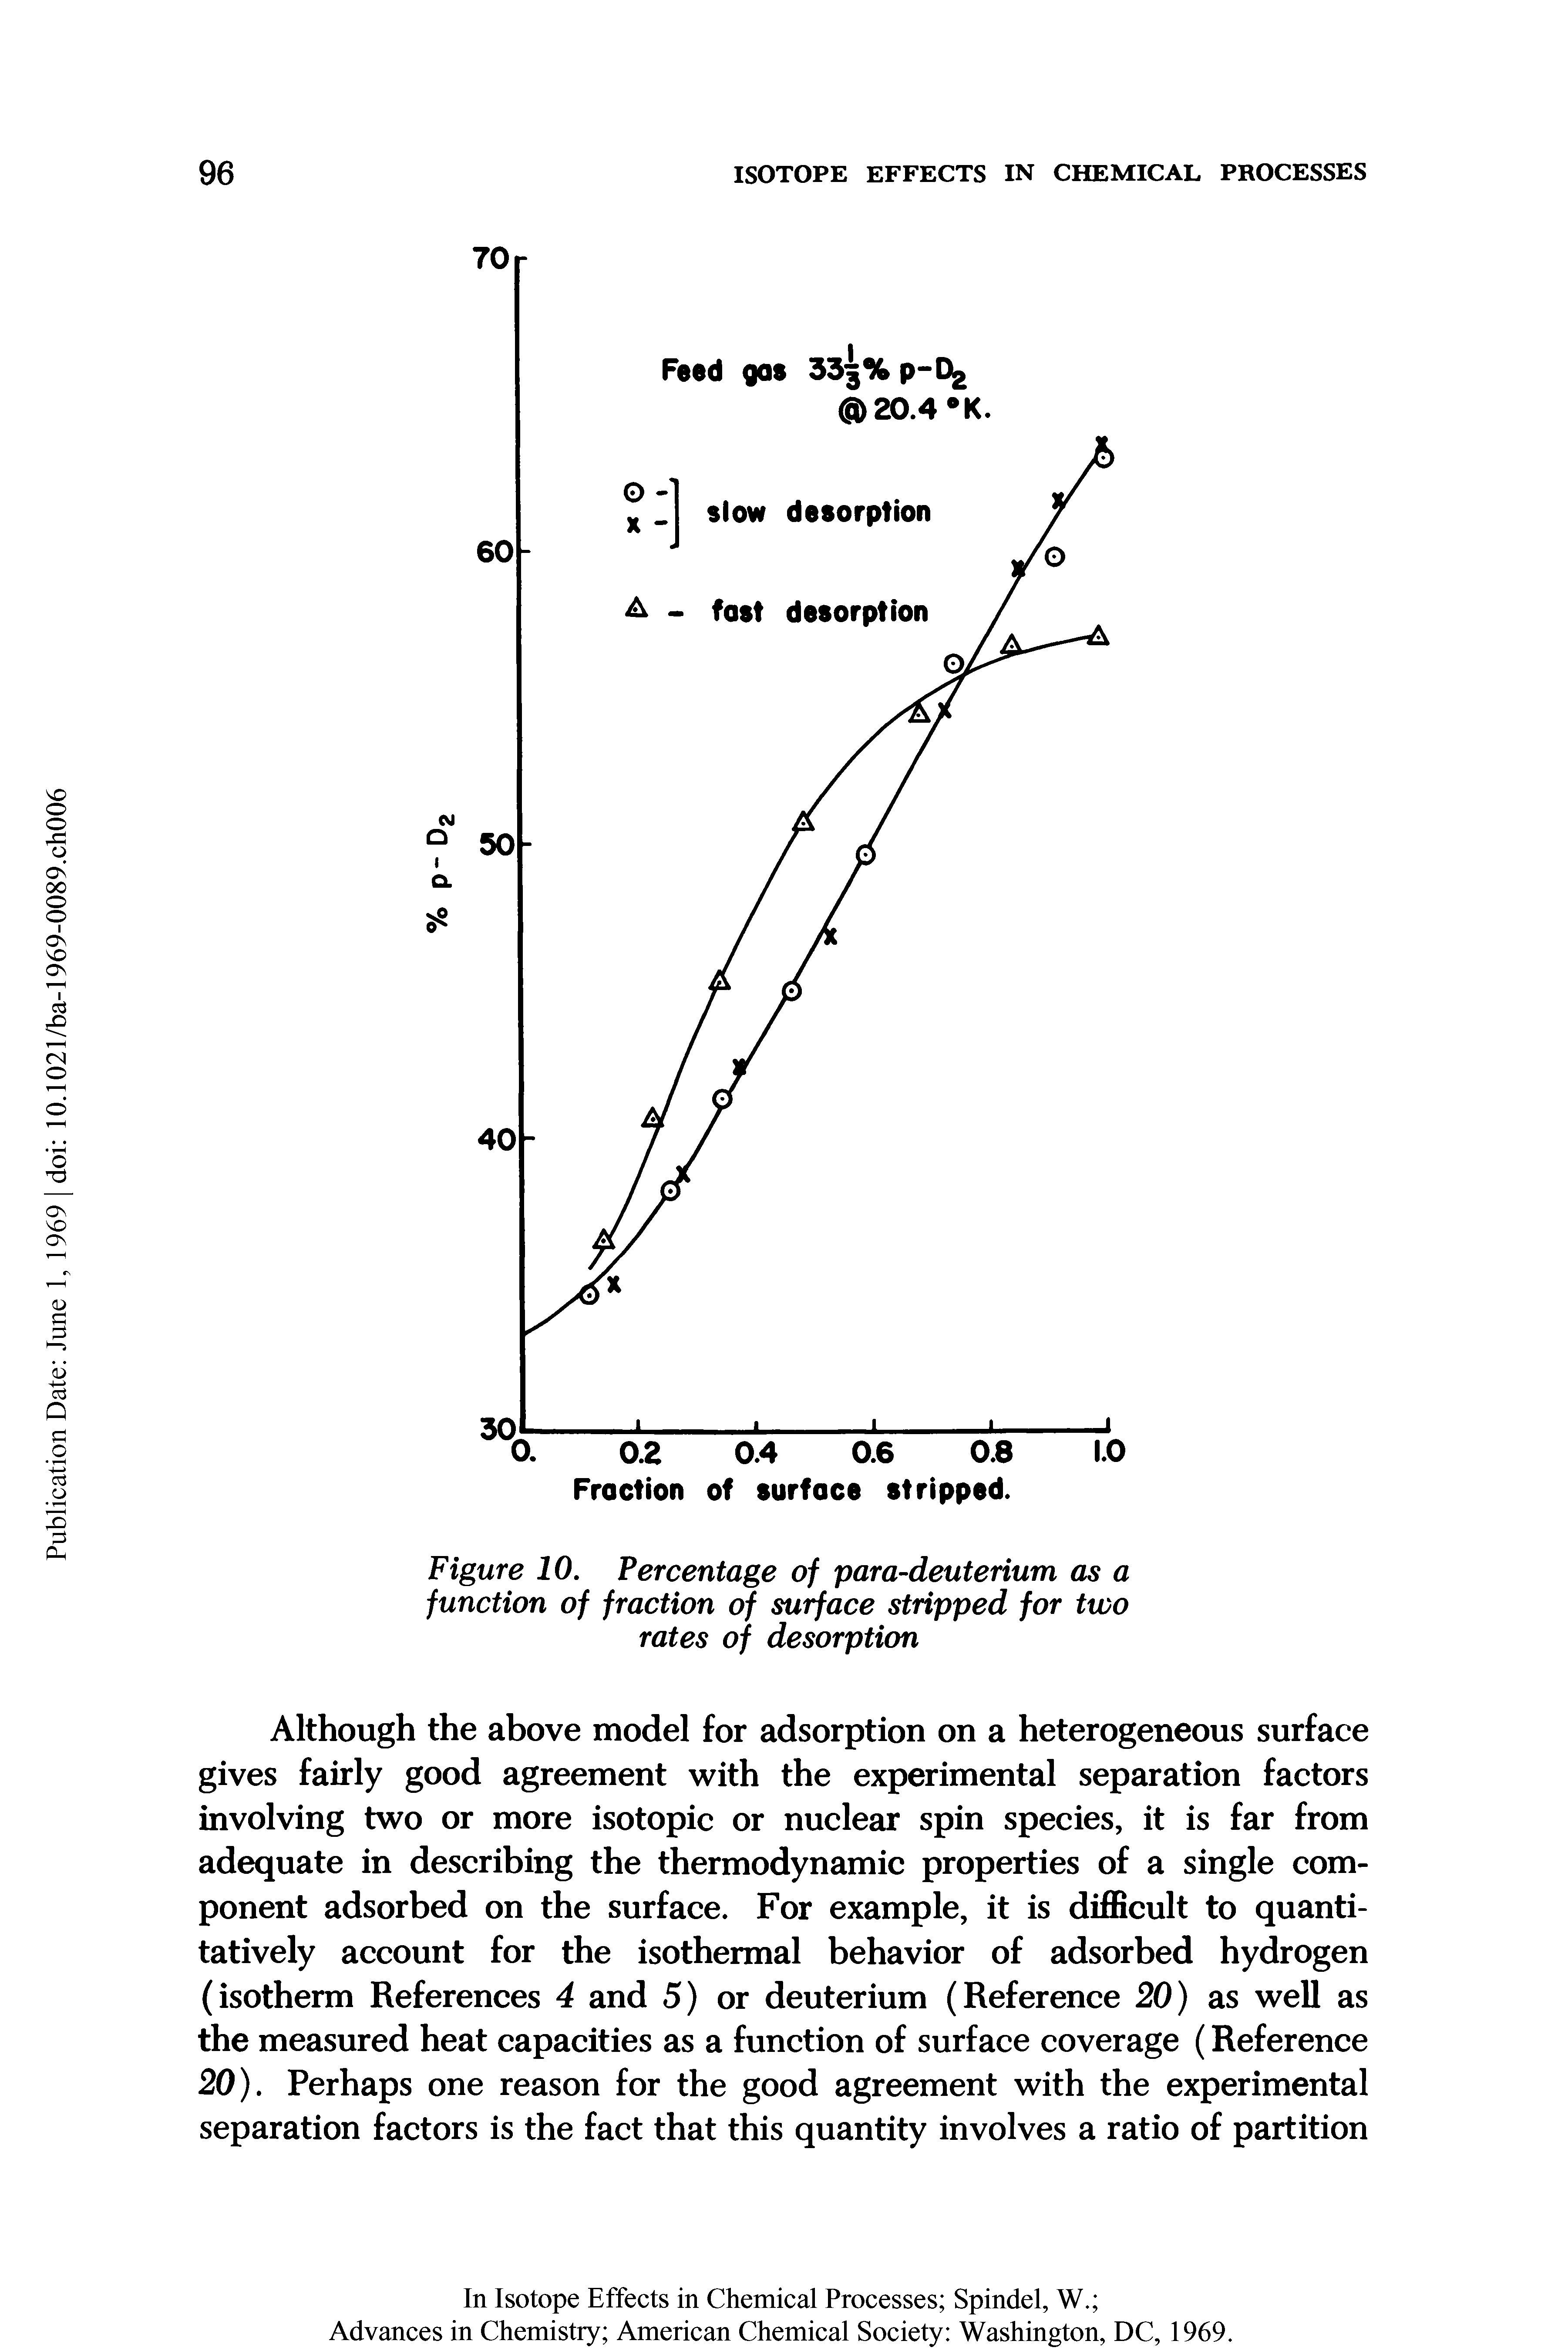 Figure 10. Percentage of para-deuterium as a function of fraction of surface stripped for two rates of desorption...